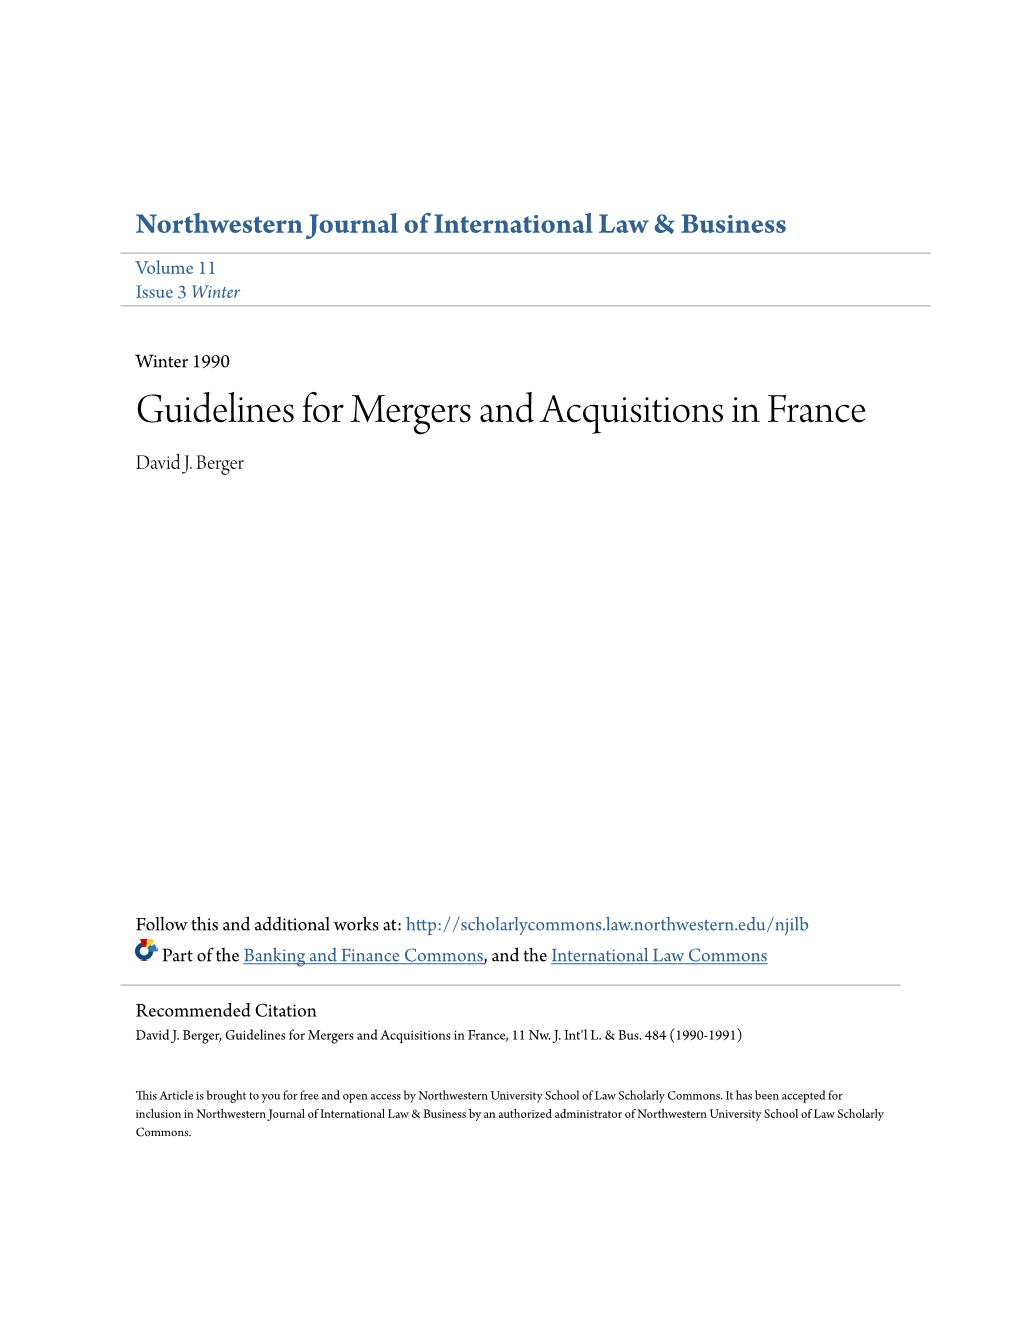 Guidelines for Mergers and Acquisitions in France David J